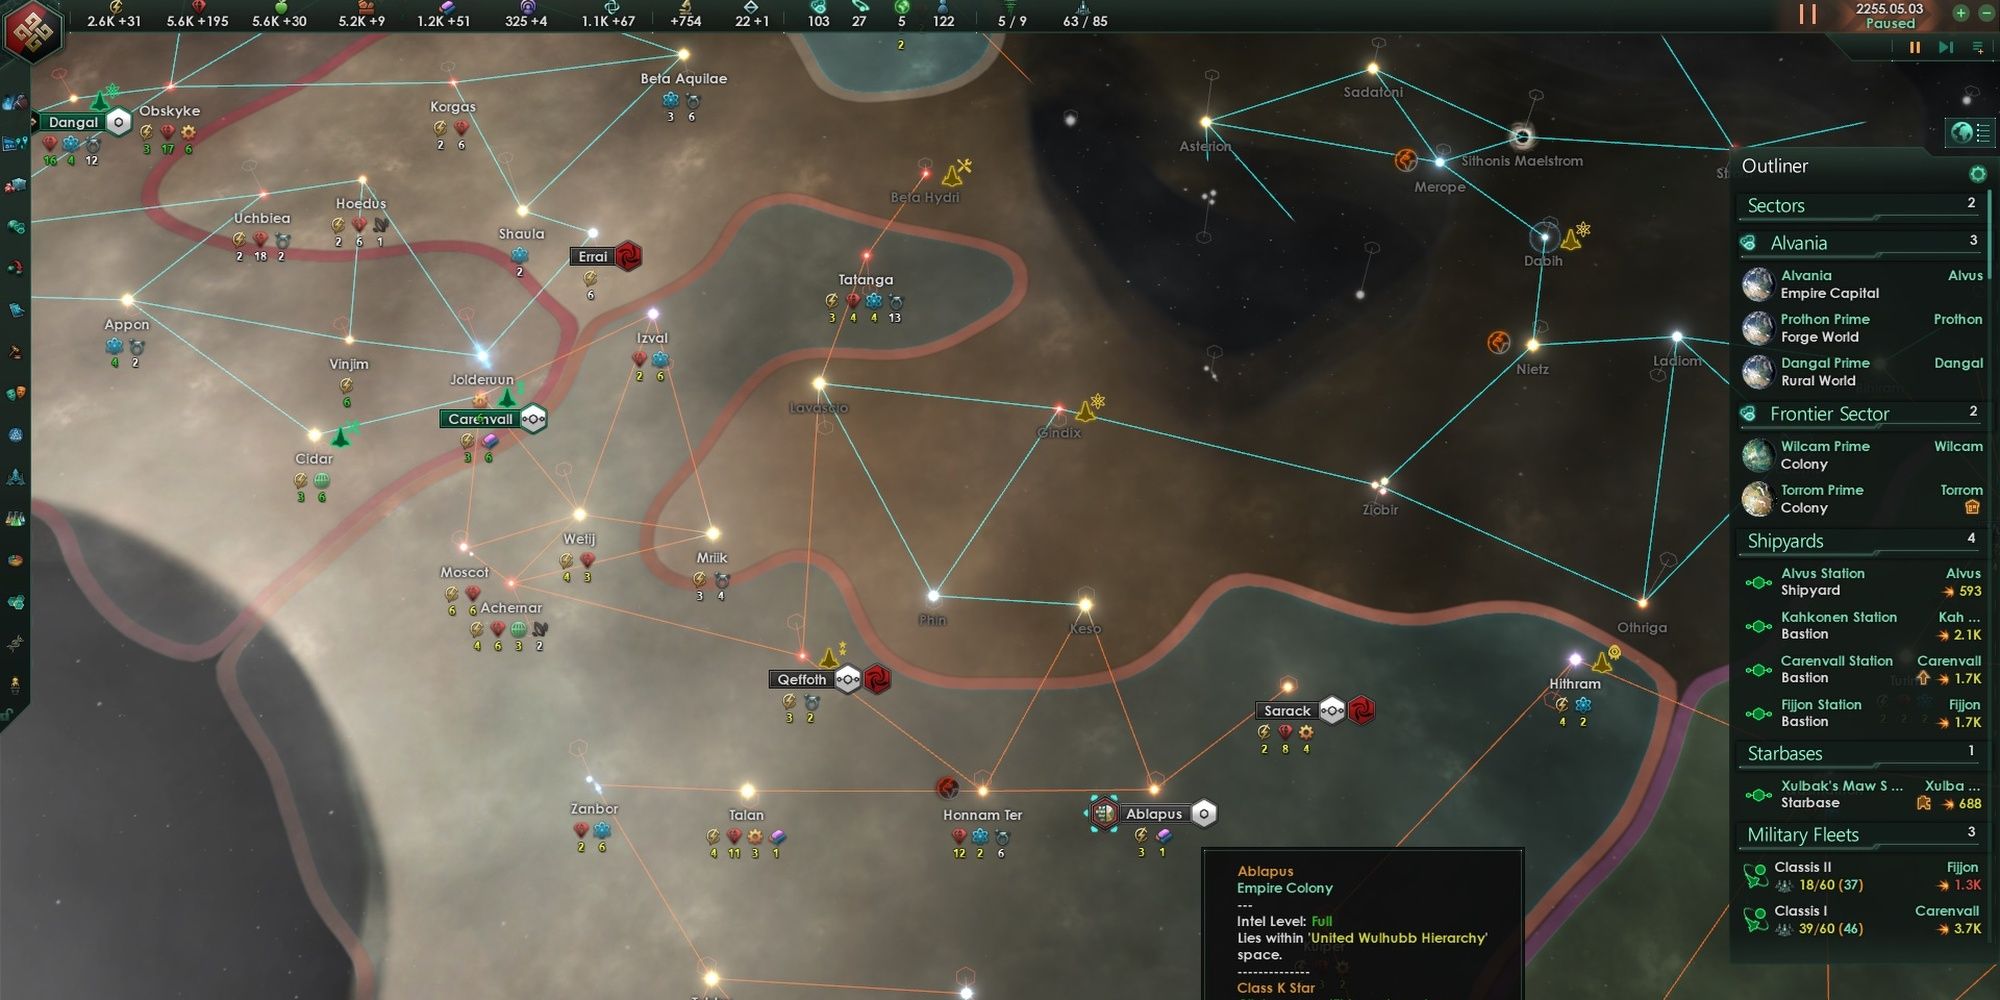 A Stellaris empire in early expansion